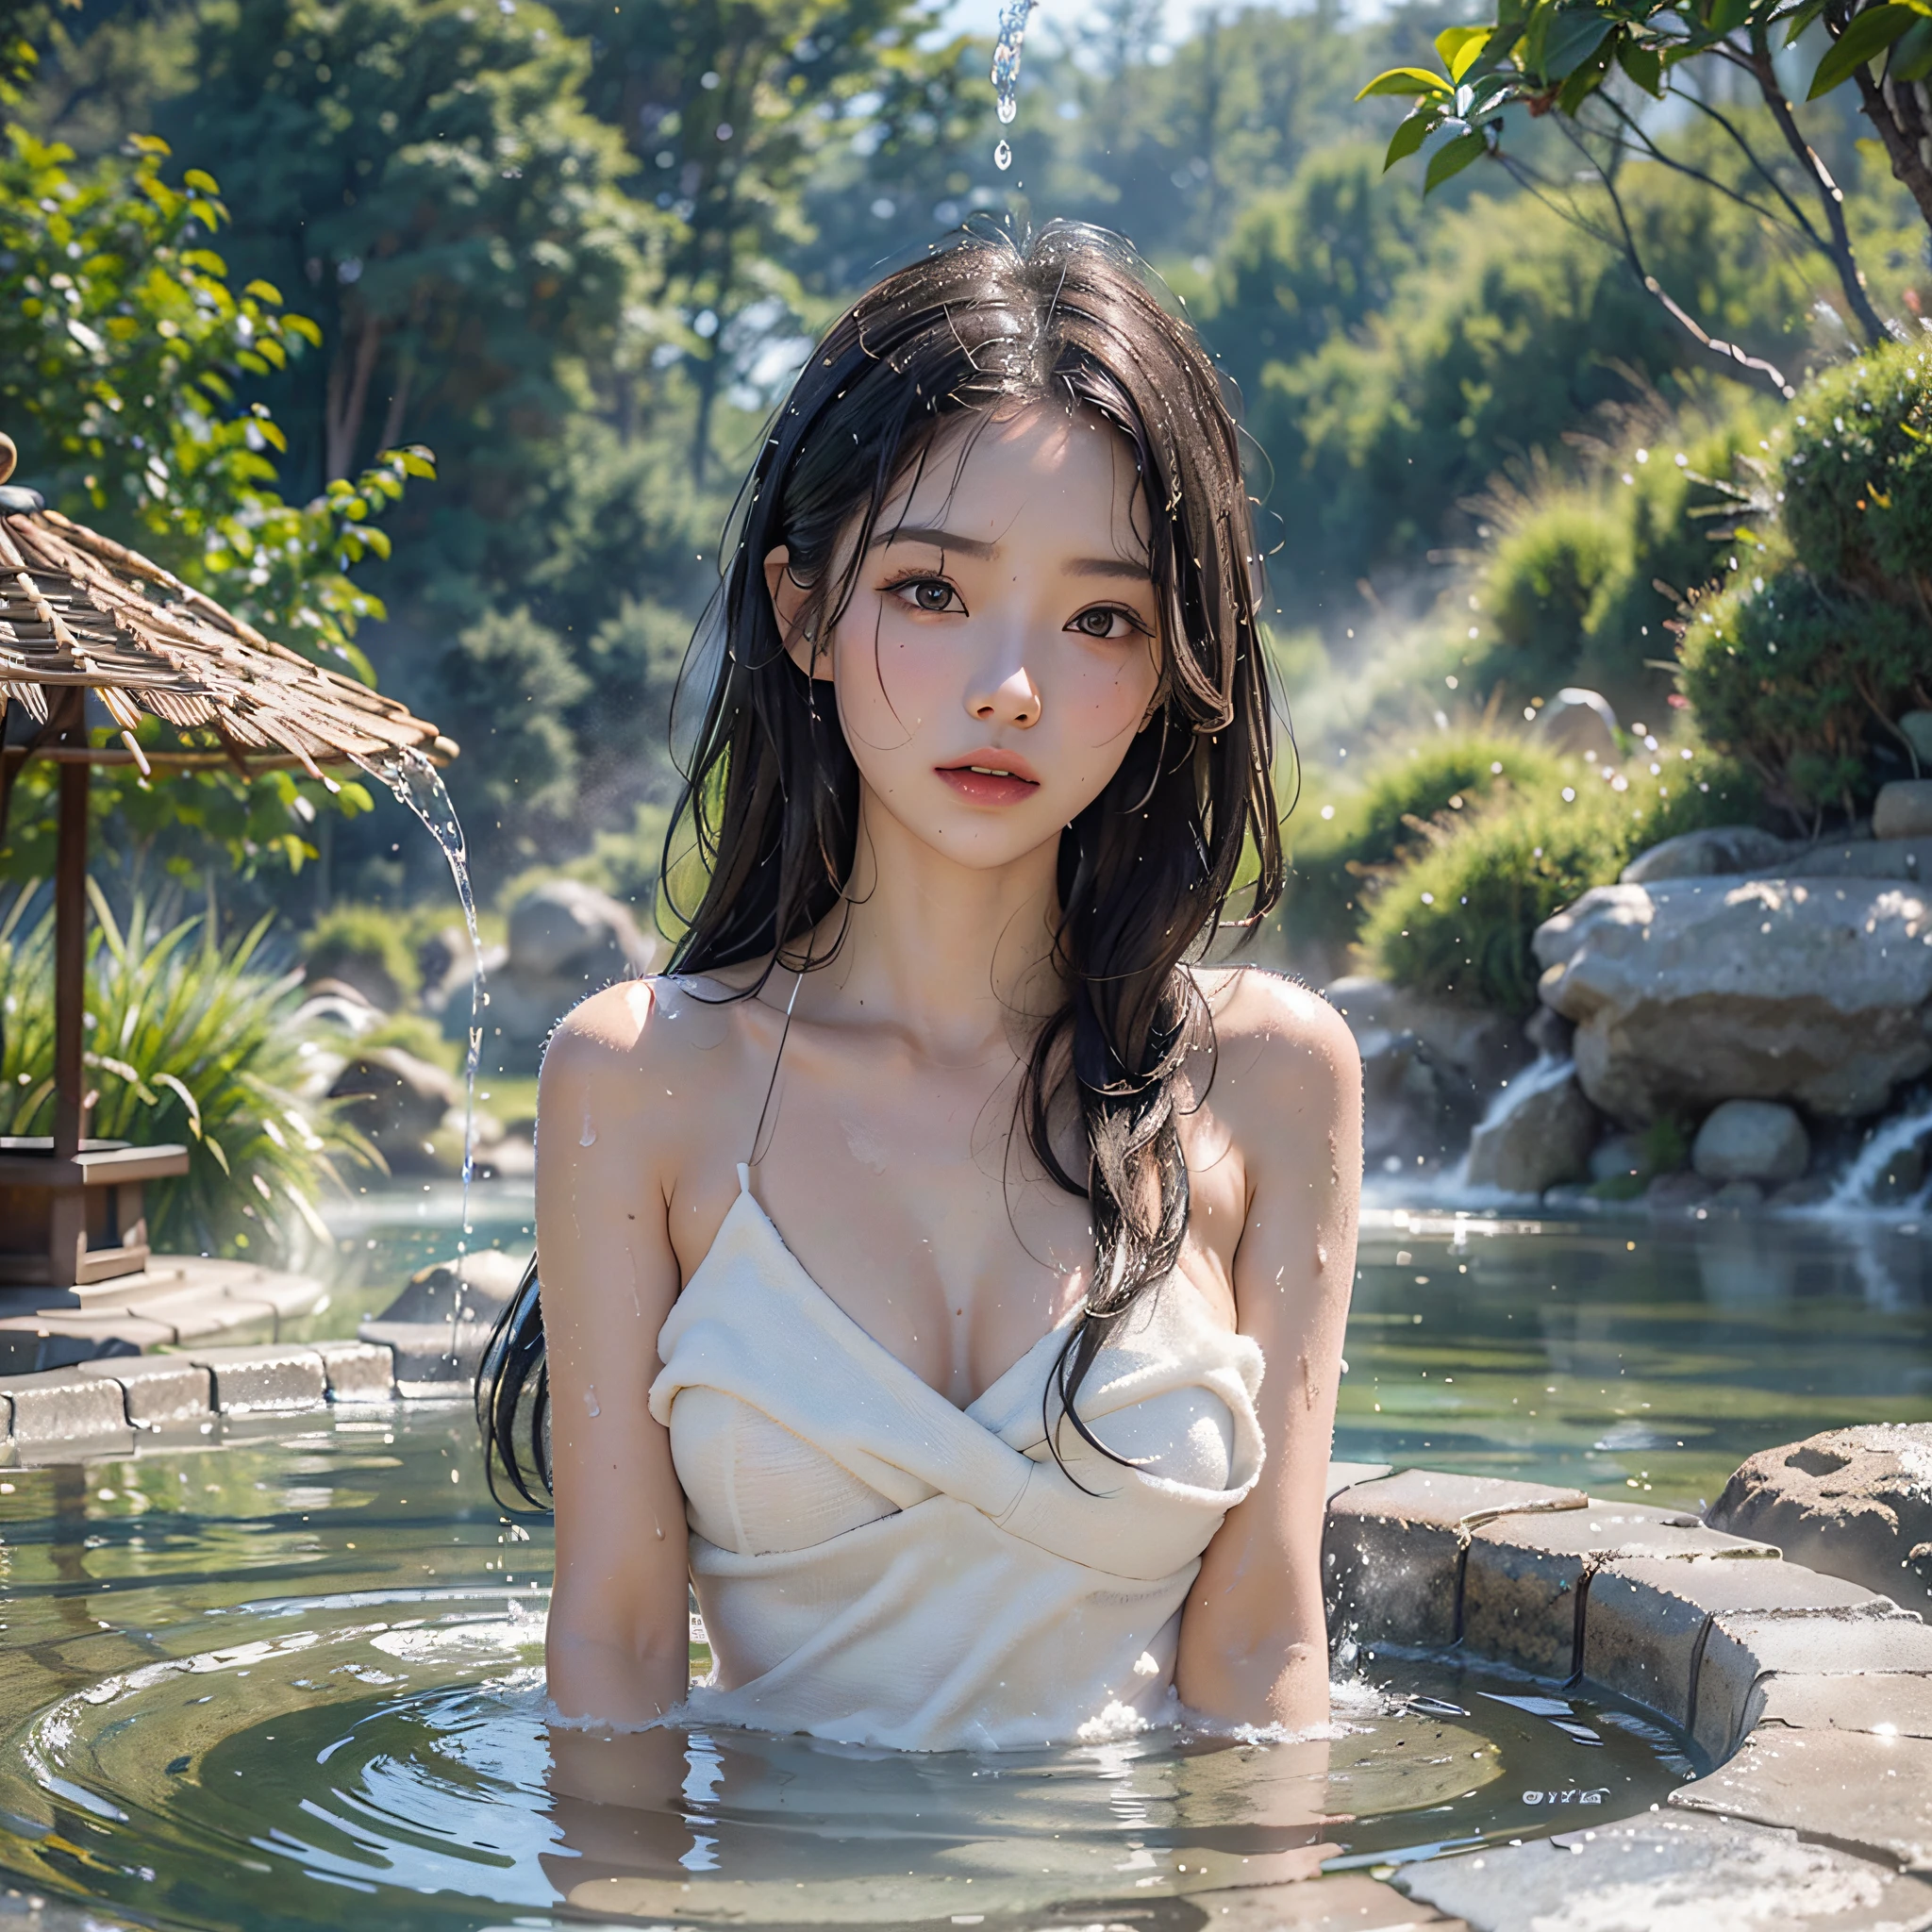 8k, Top Quality, (Beauty), High Definition, Realistic, Real Person, Young and Pretty Single Girl, (Naked Towel), (Geyser, Hot Spring:1.2), Moist Skin, (Mist:1.2), Mist, Glossy Skin, (Partially Submerged in Hot Spring Bath:1.2), (Wet Hair:1.2), Mist, Wet, Moisturize, Beautiful Japan Mountains and Lakes,